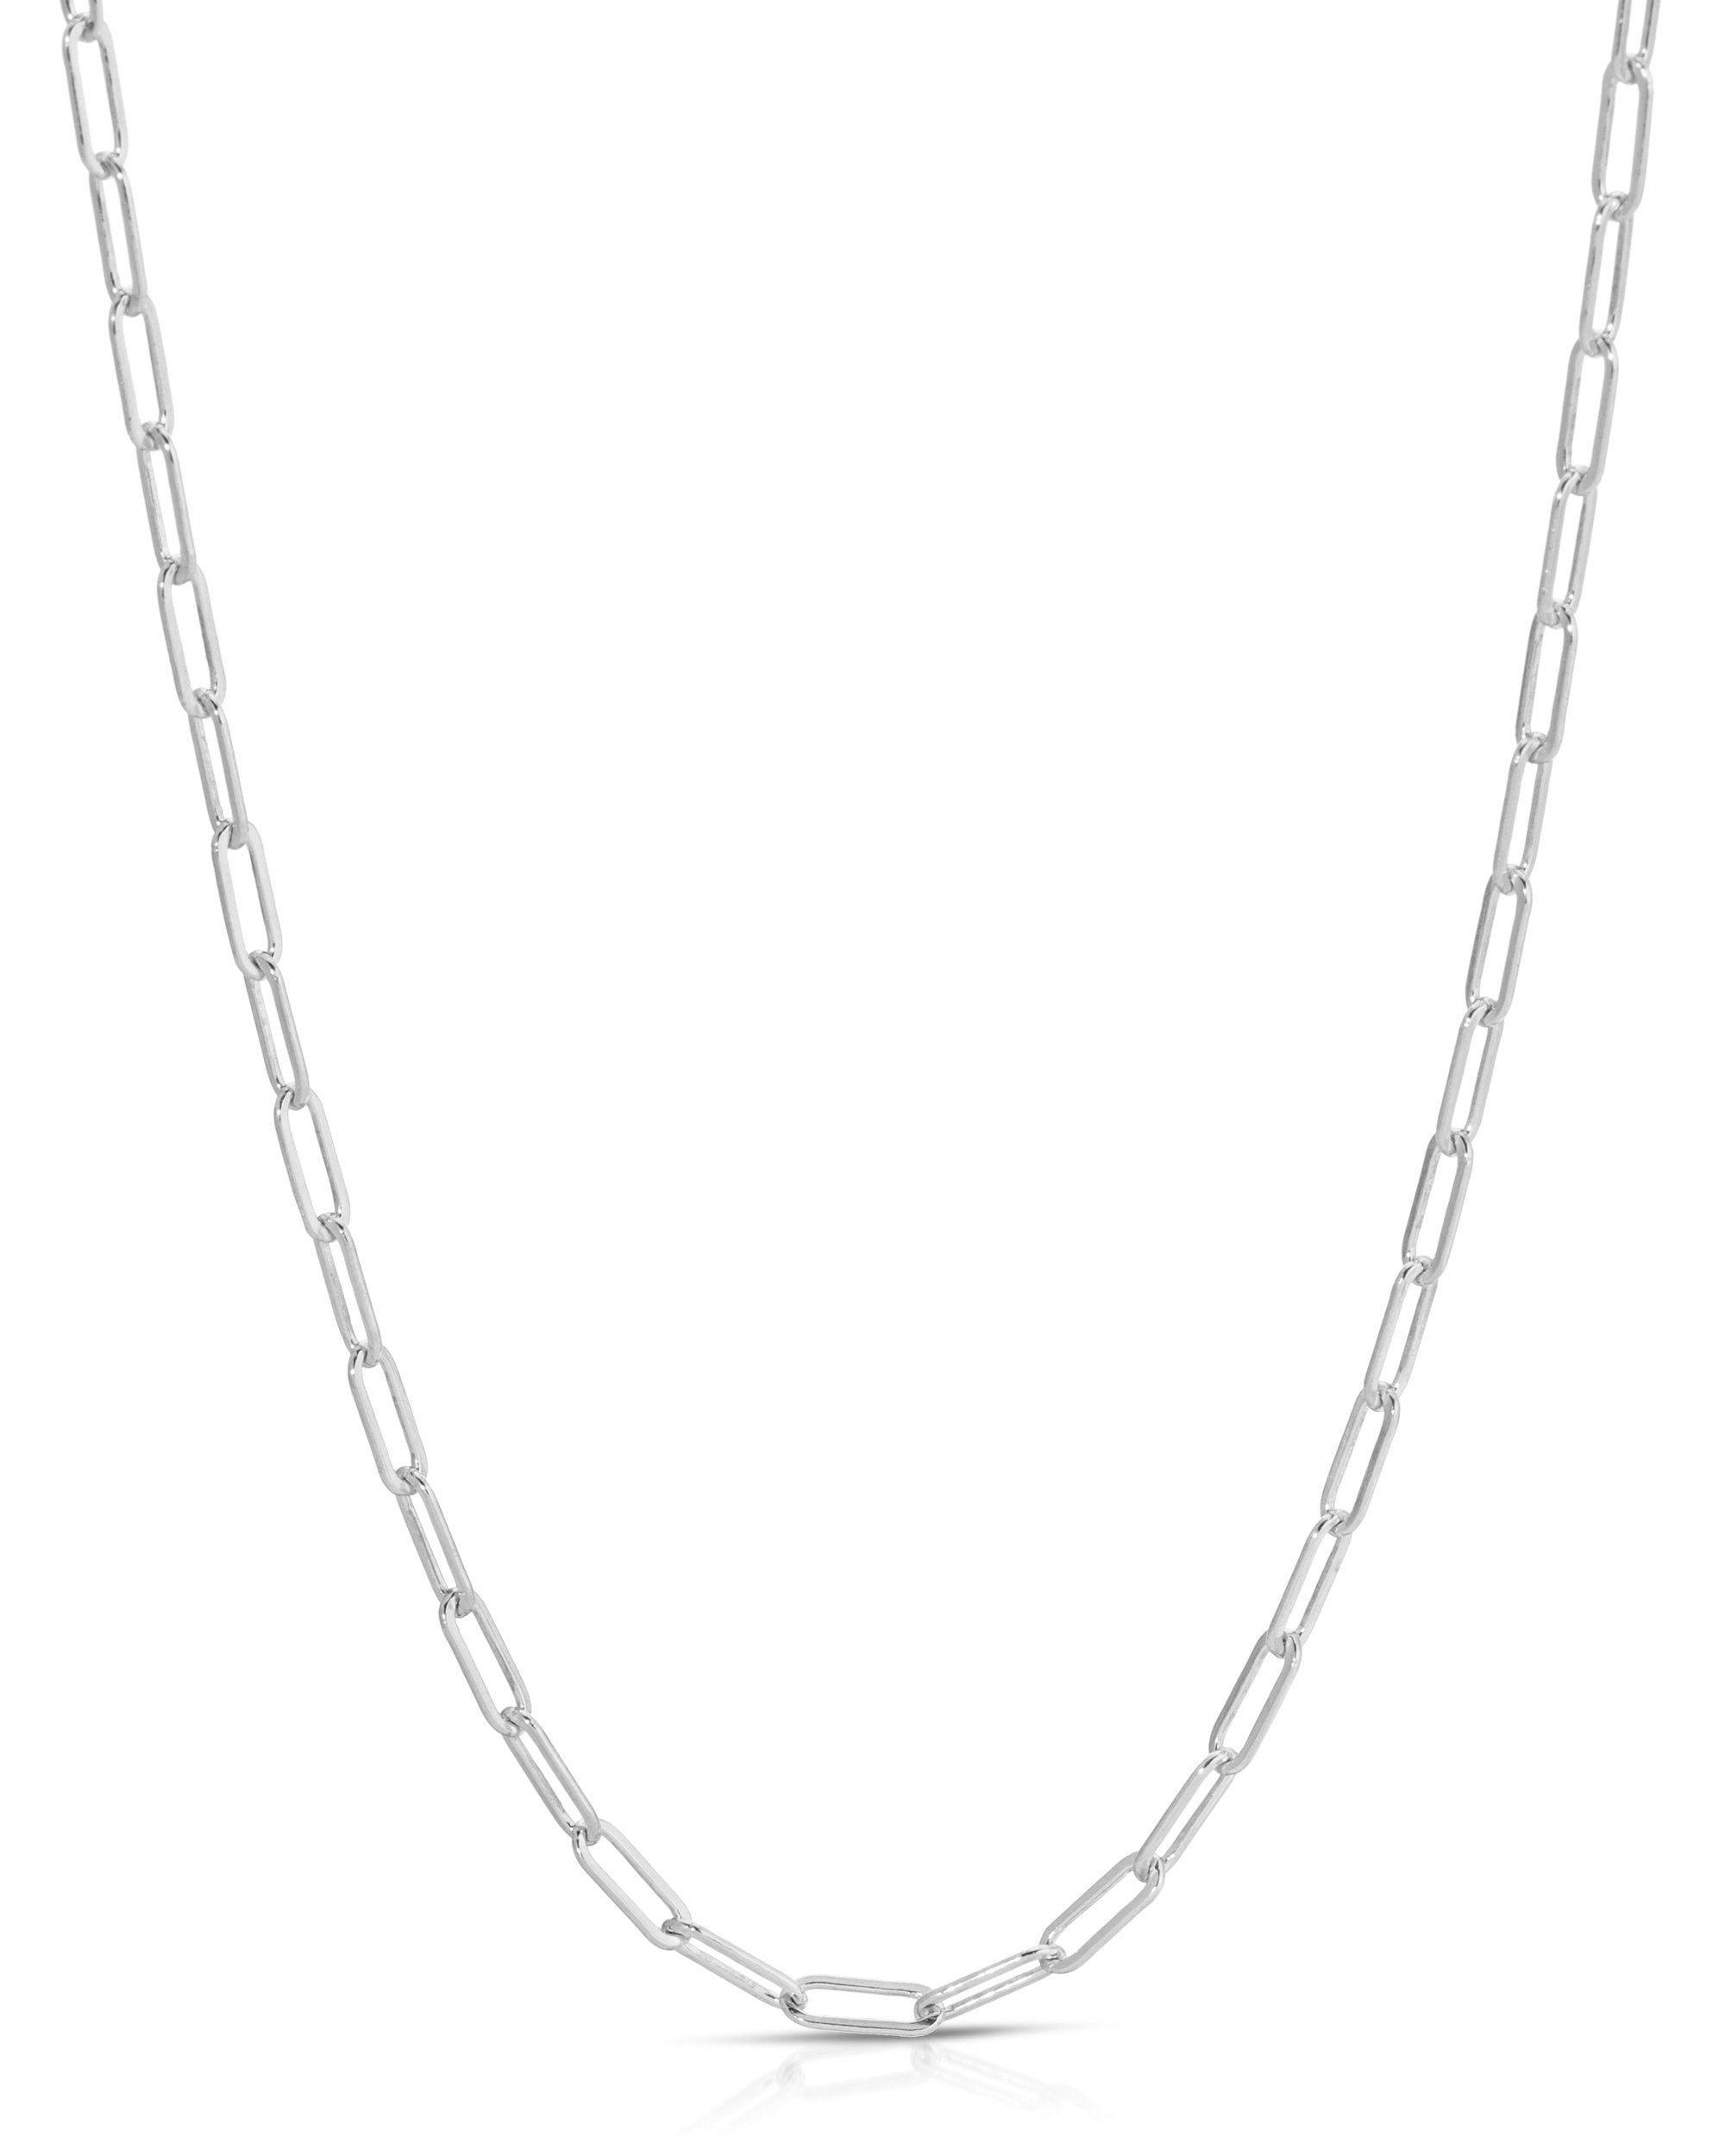 Nora Necklace by KOZAKH. A 14 to 16 inch adjustable length, thin flat link paperclip style chain necklace, crafted in Sterling Silver.